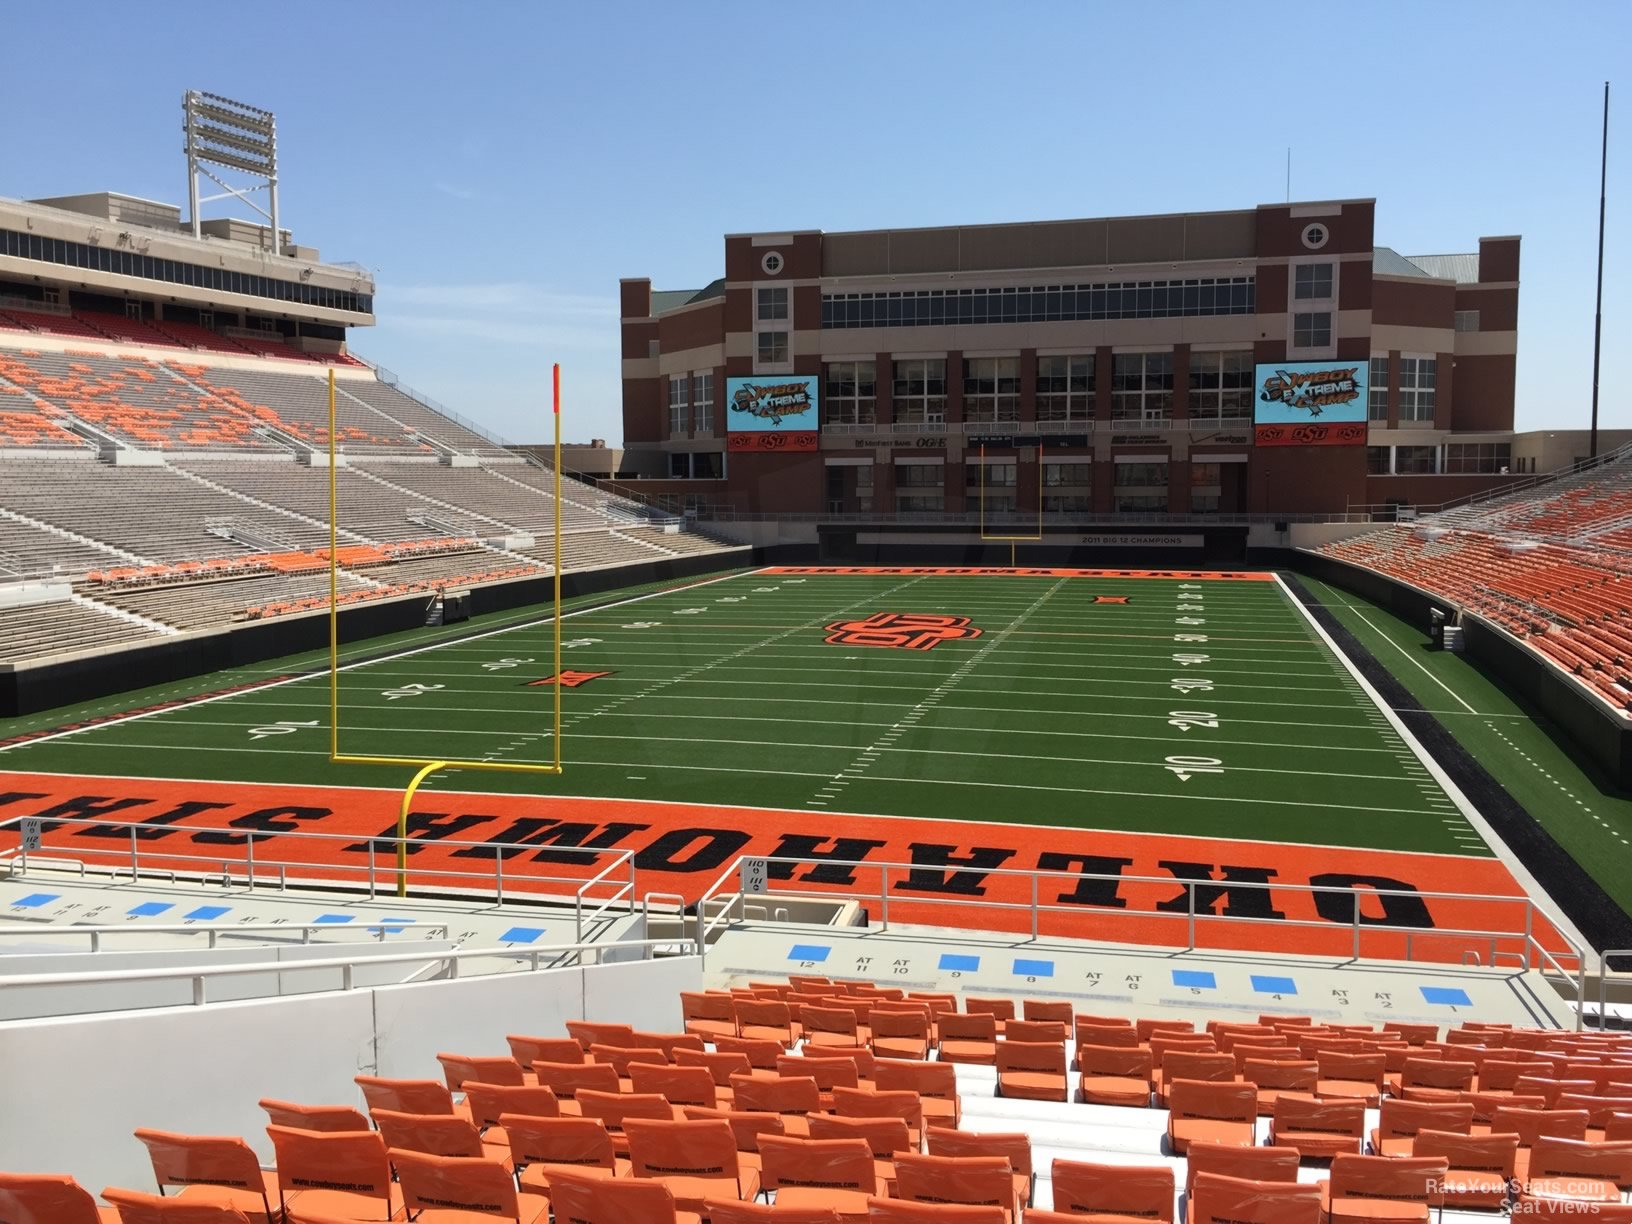 section 214, row 20 seat view  - boone pickens stadium